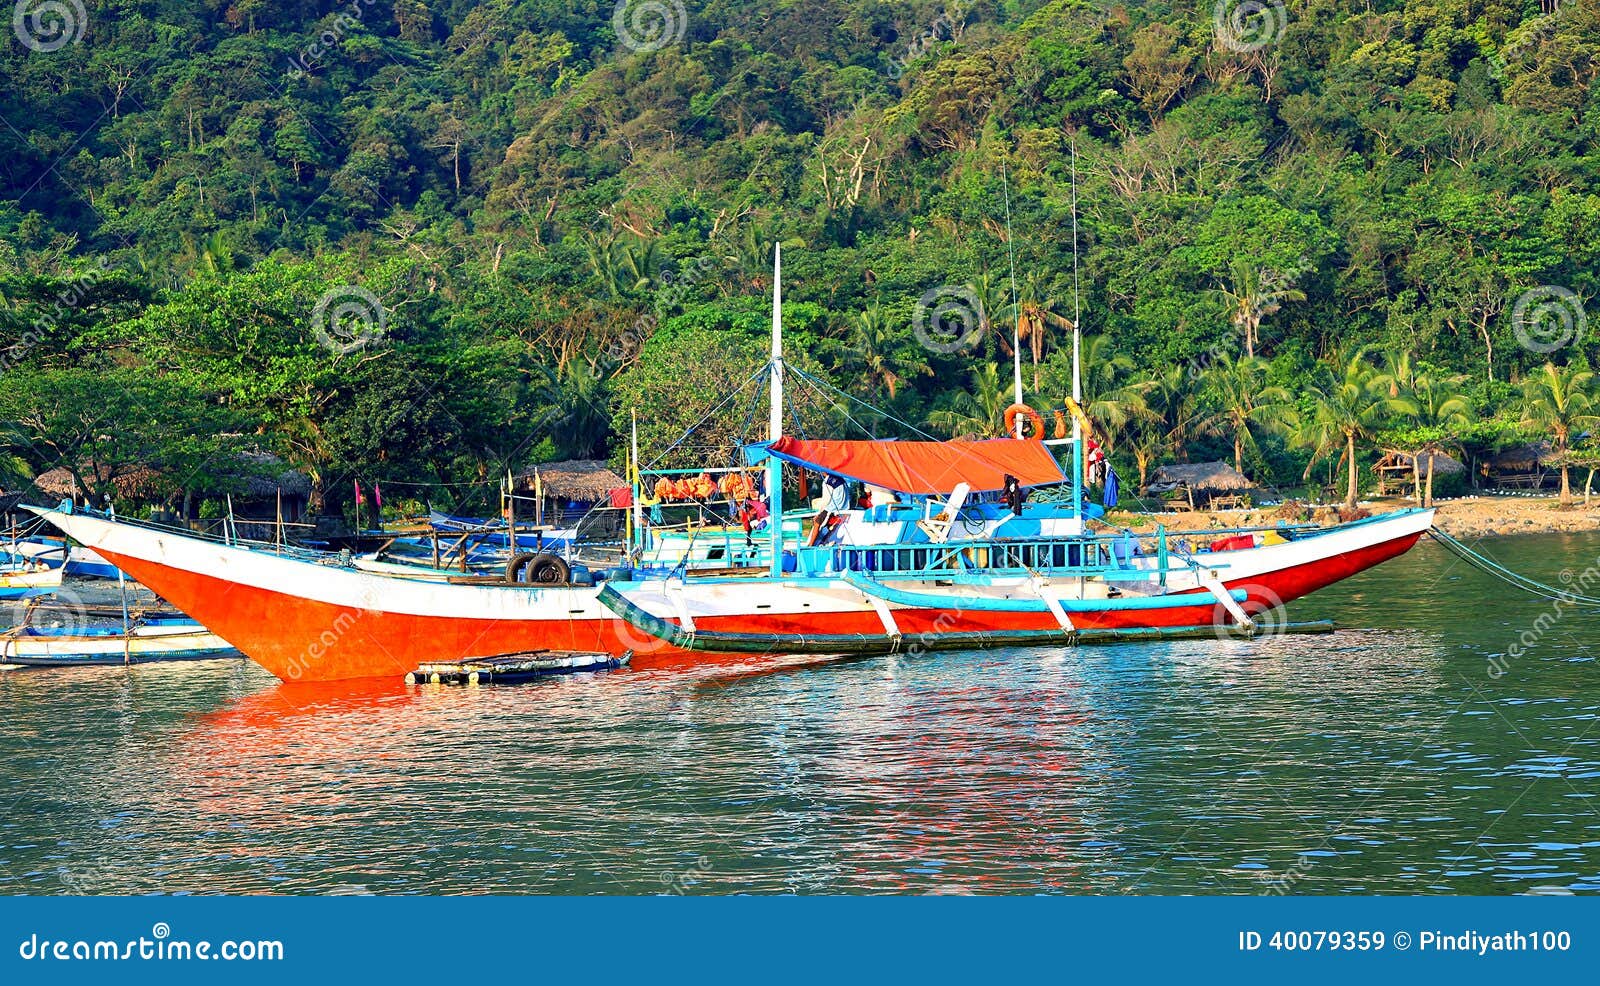 Fishing Boats In The Philippines Stock Image - Image: 40079359